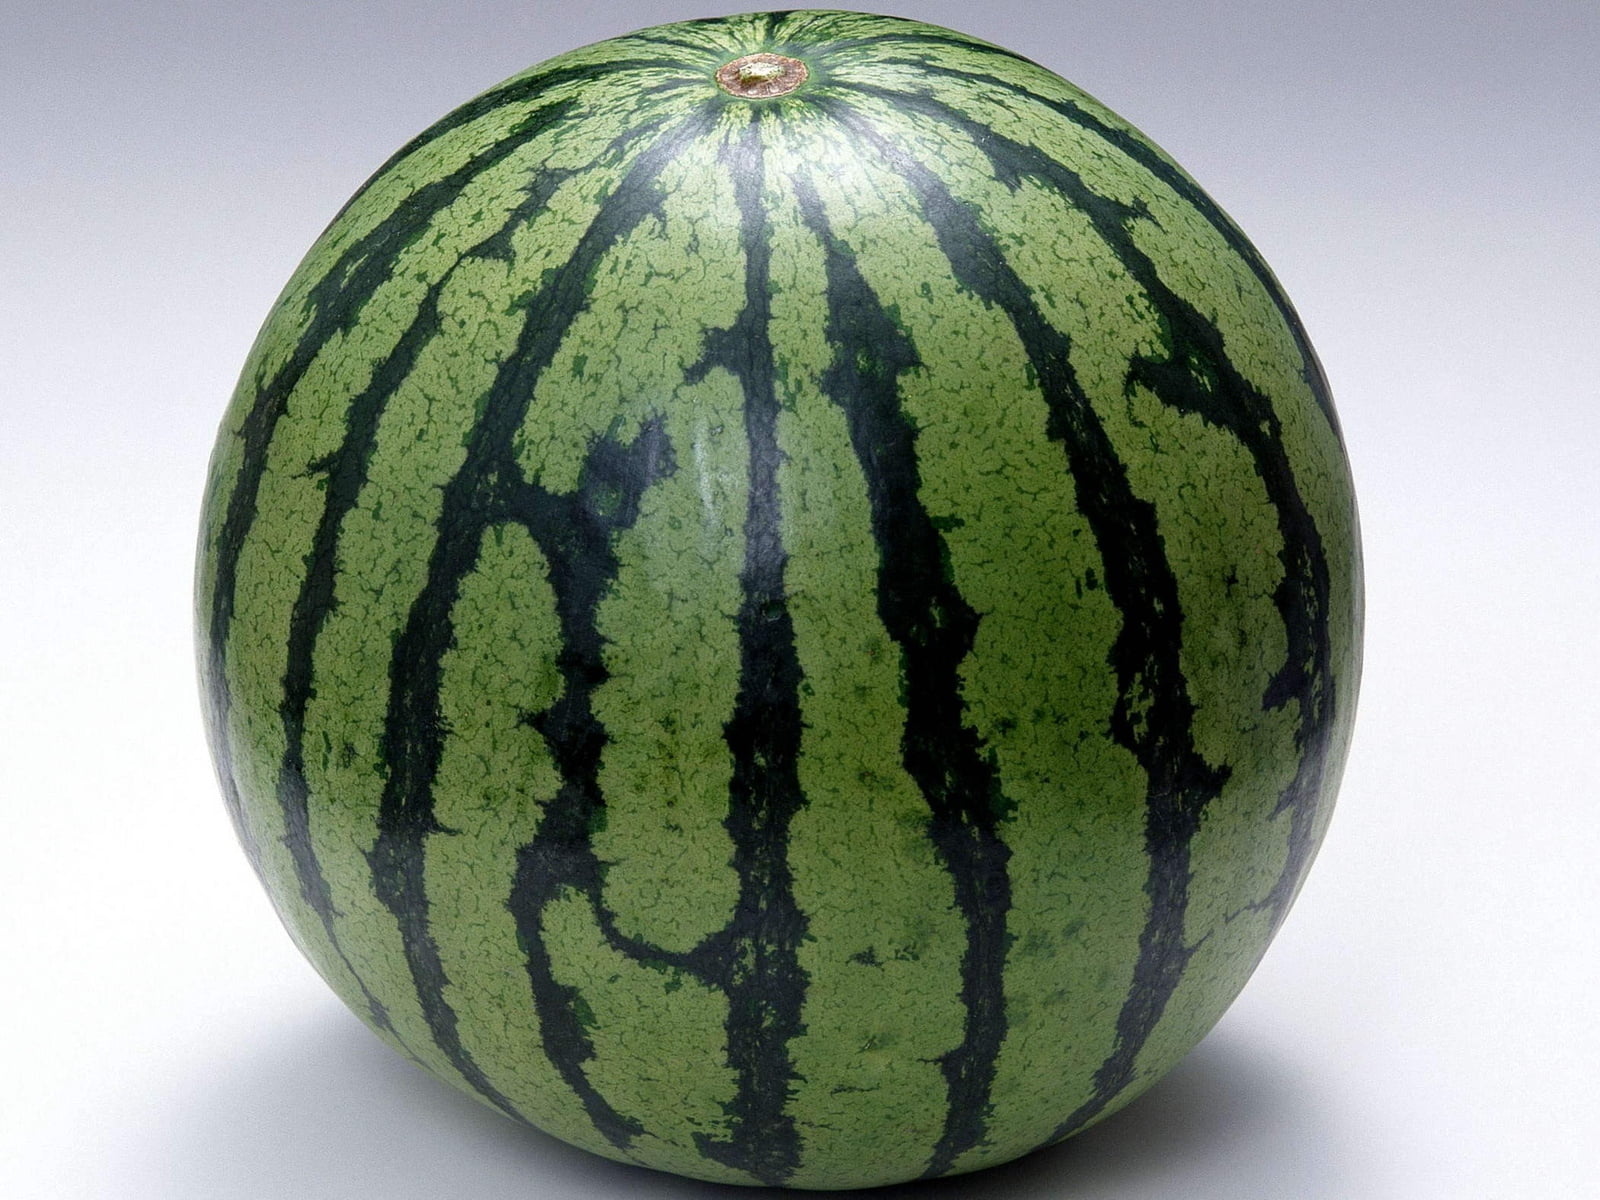 watermelon fruit, berry, ripe, food, freshness, healthy Eating